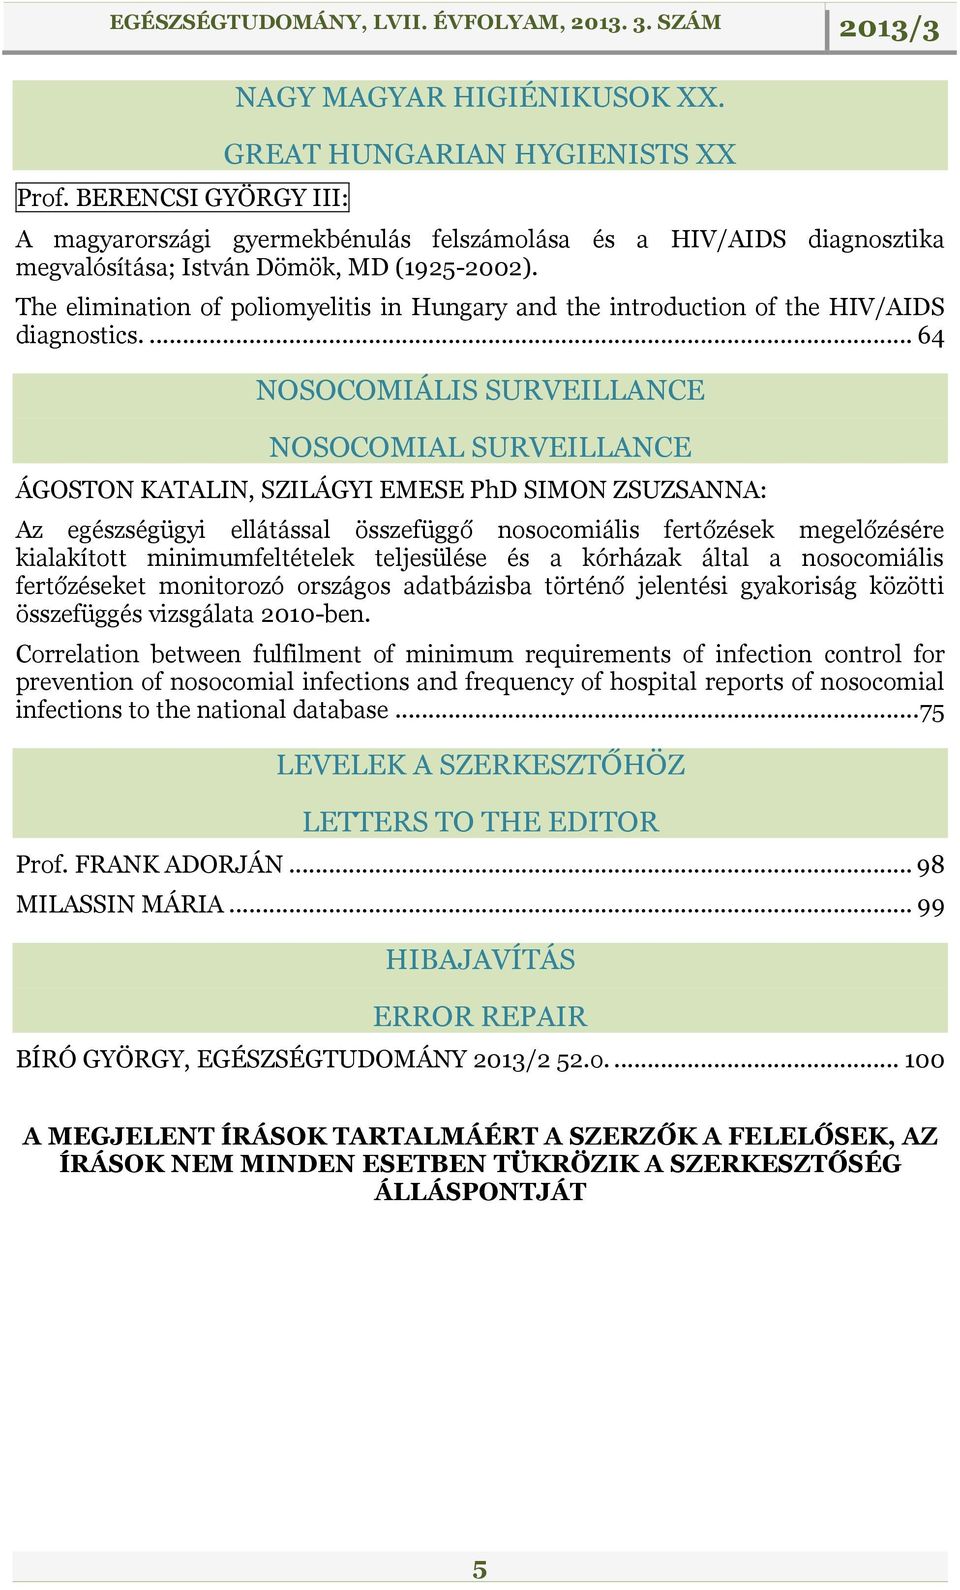 The elimination of poliomyelitis in Hungary and the introduction of the HIV/AIDS diagnostics.